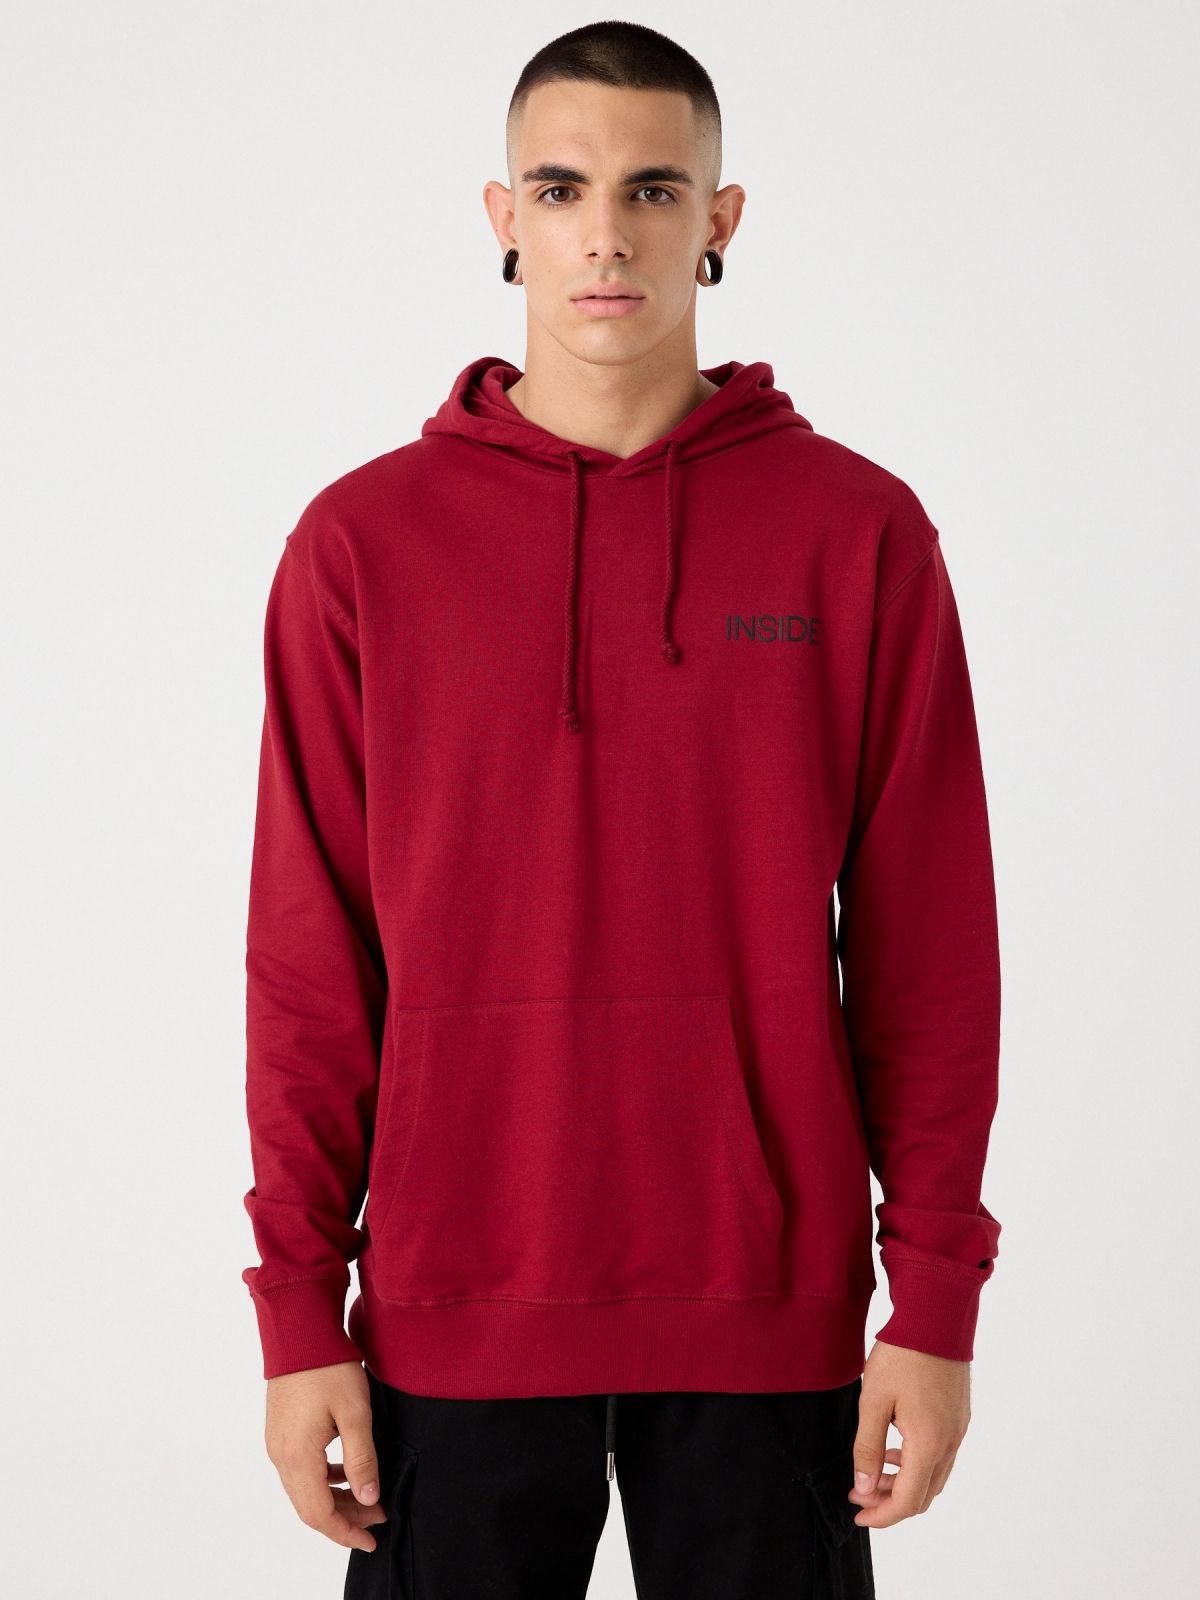 Hooded sweatshirt with logo red middle front view